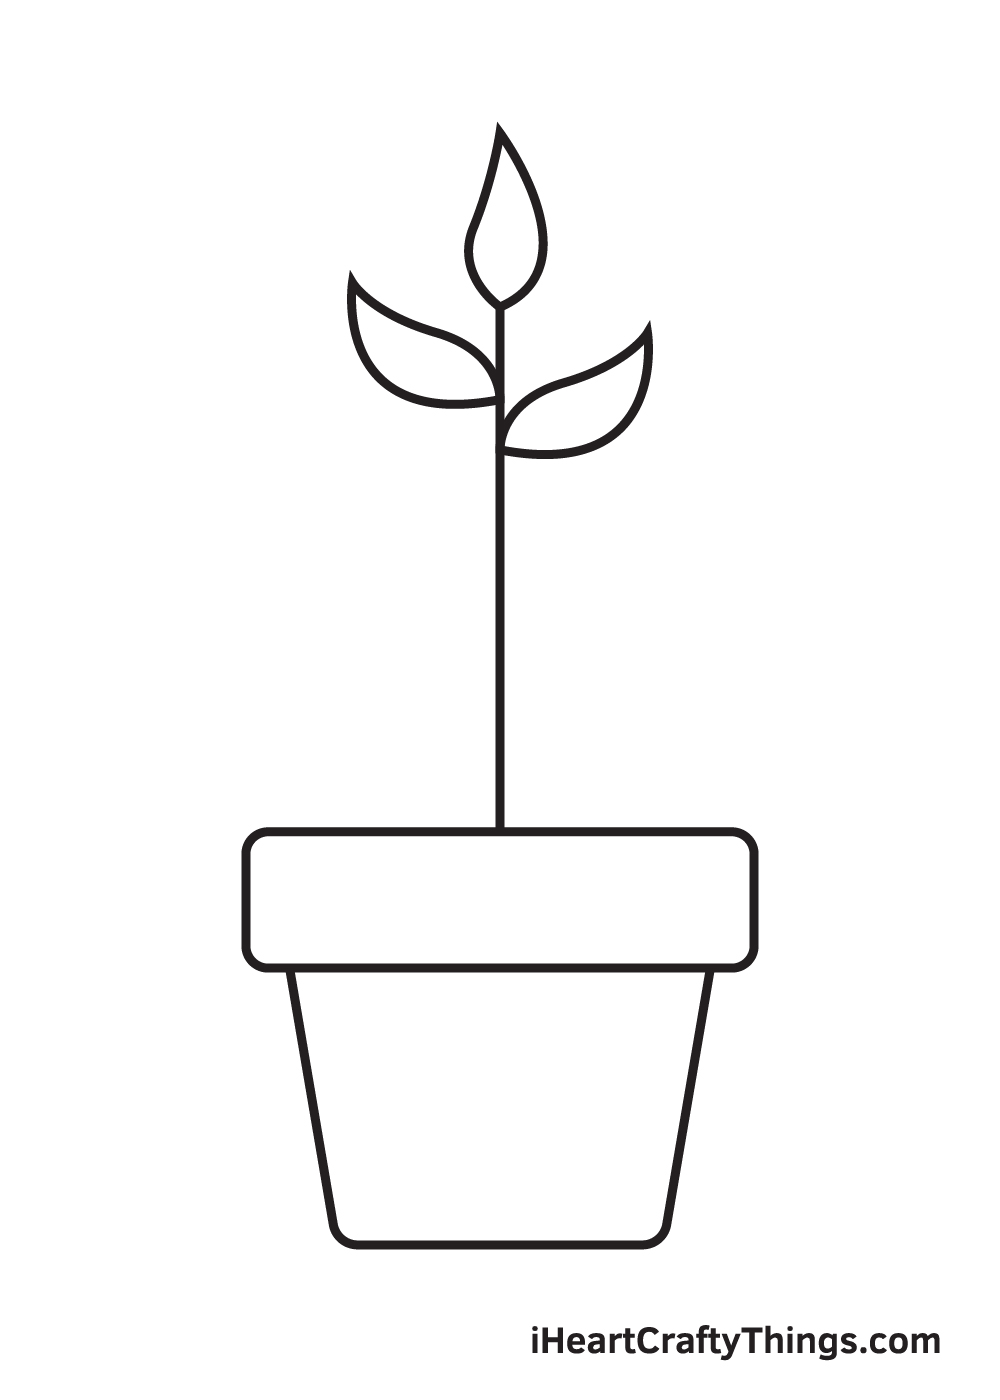 Plant Drawing - Step 5